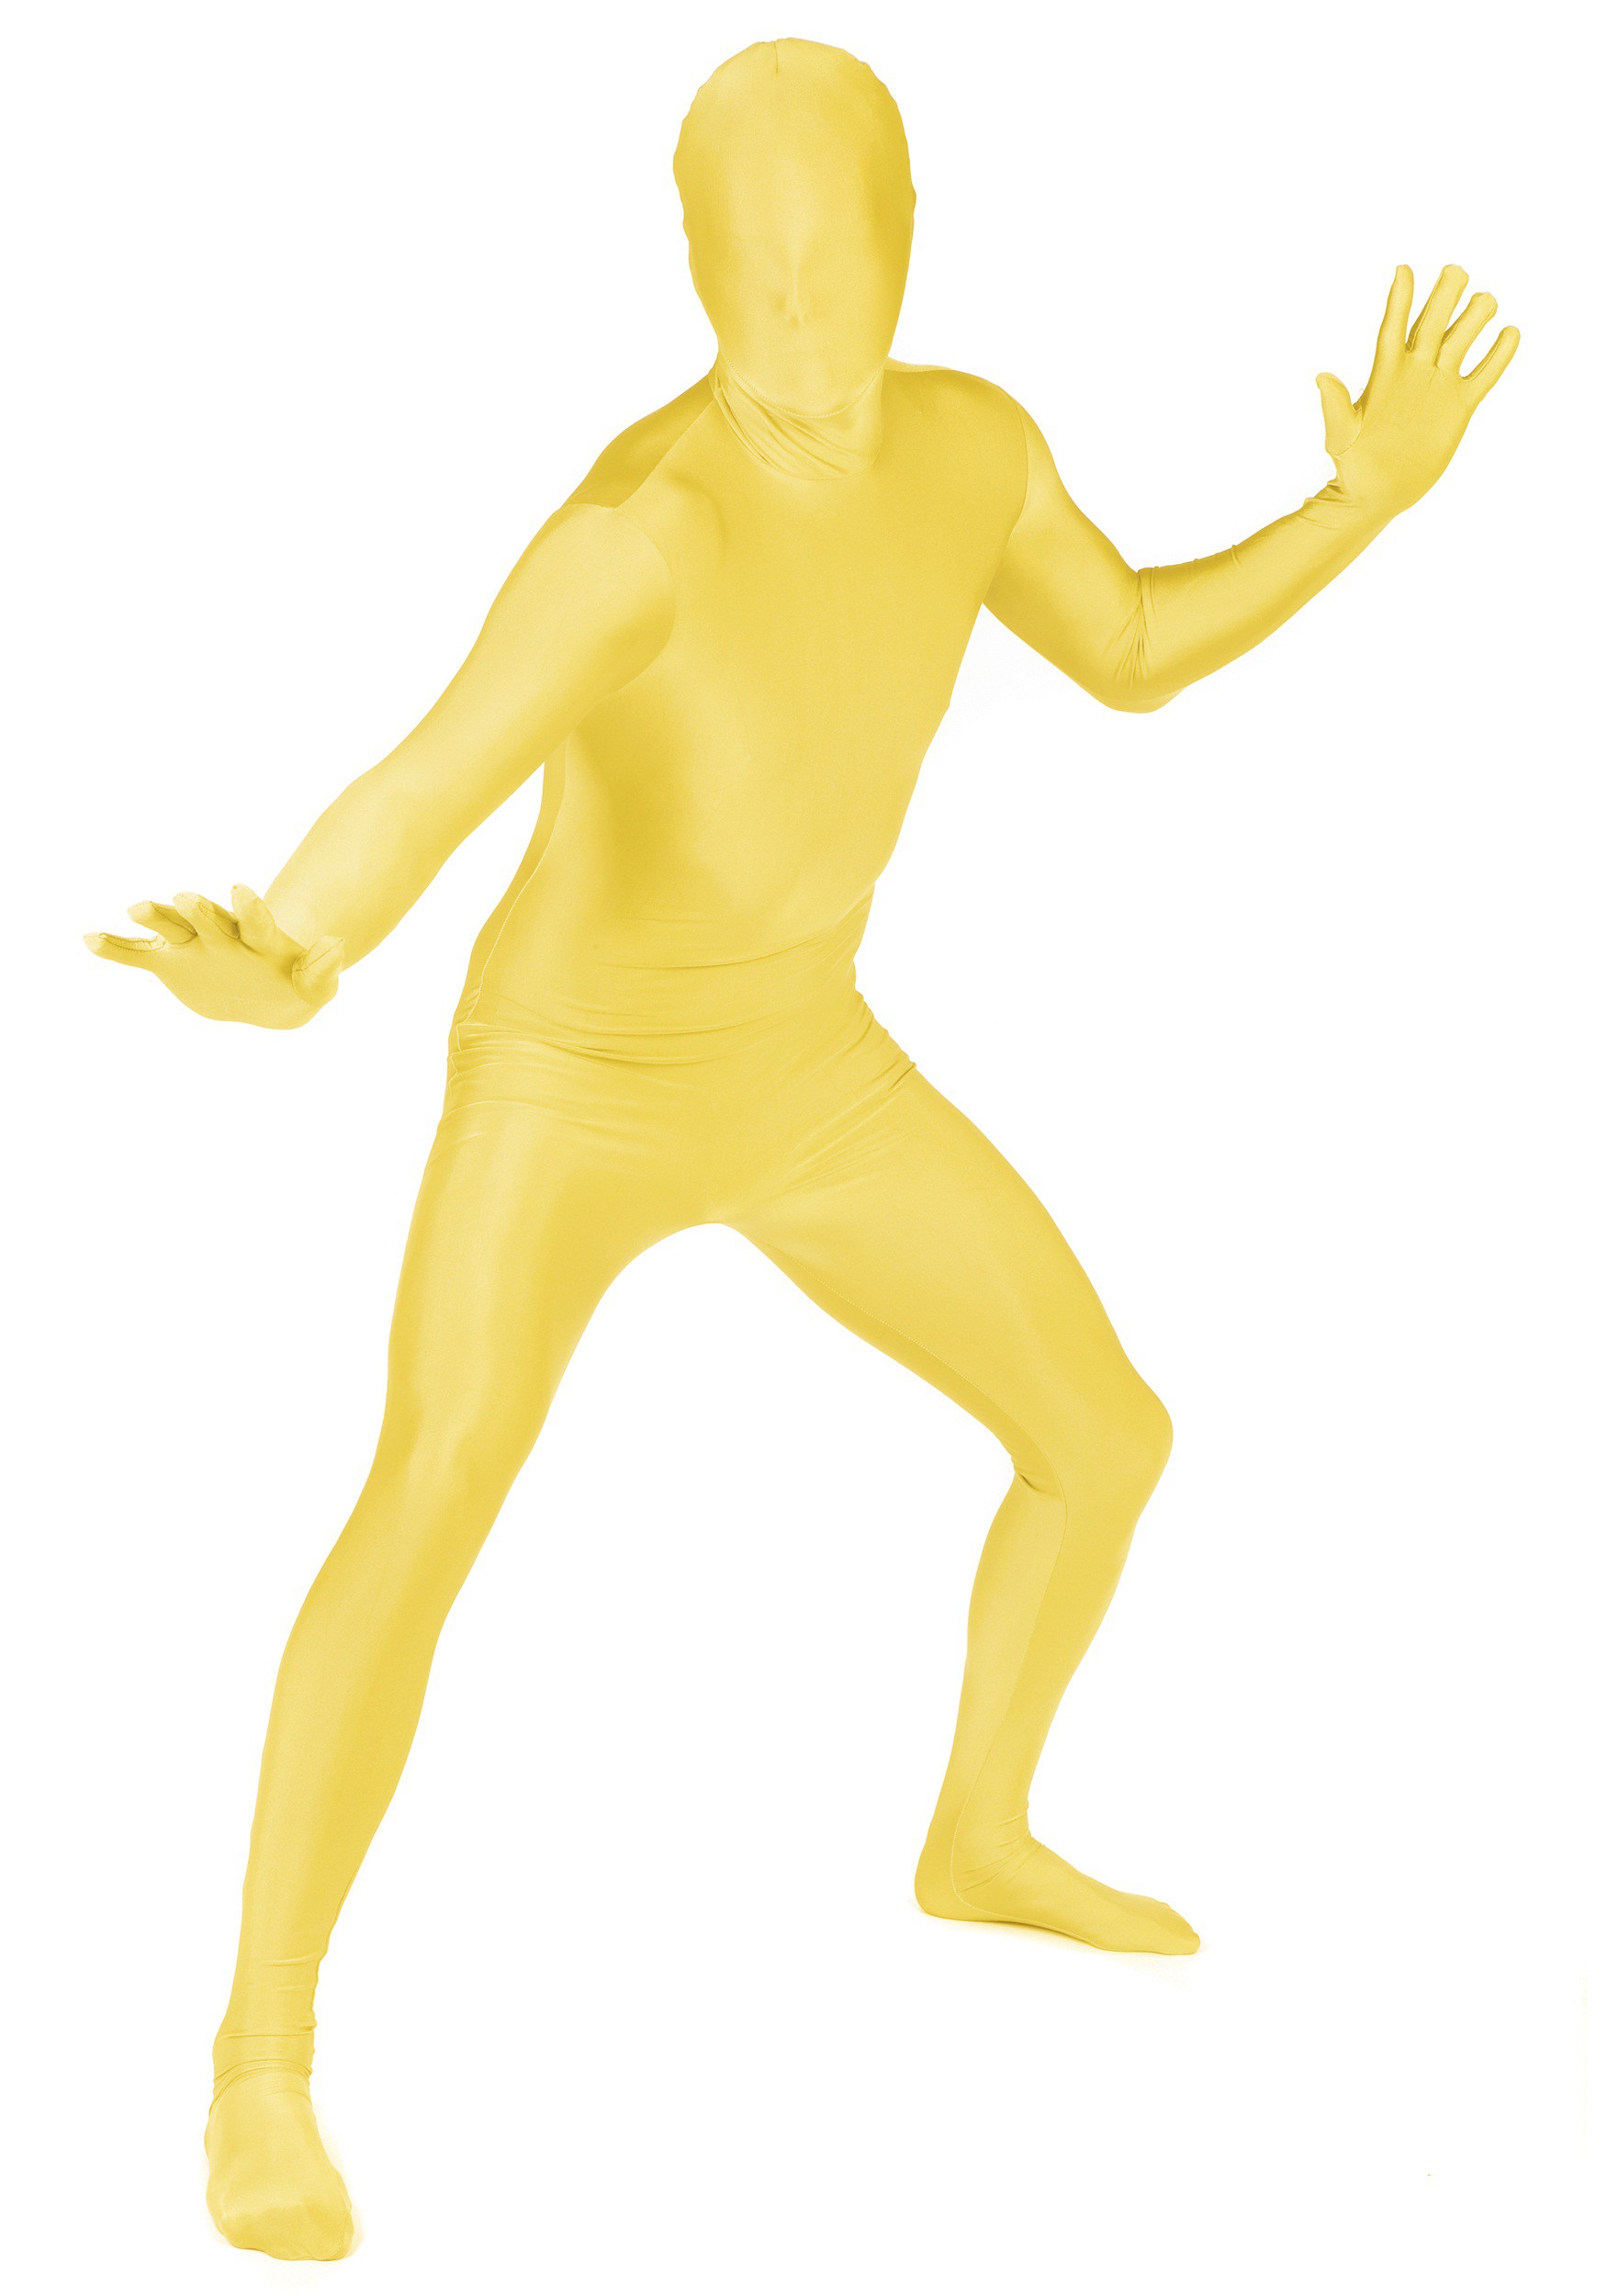 https://images.halloweencostumes.ca/products/29779/1-1/adult-yellow-morphsuit.jpg